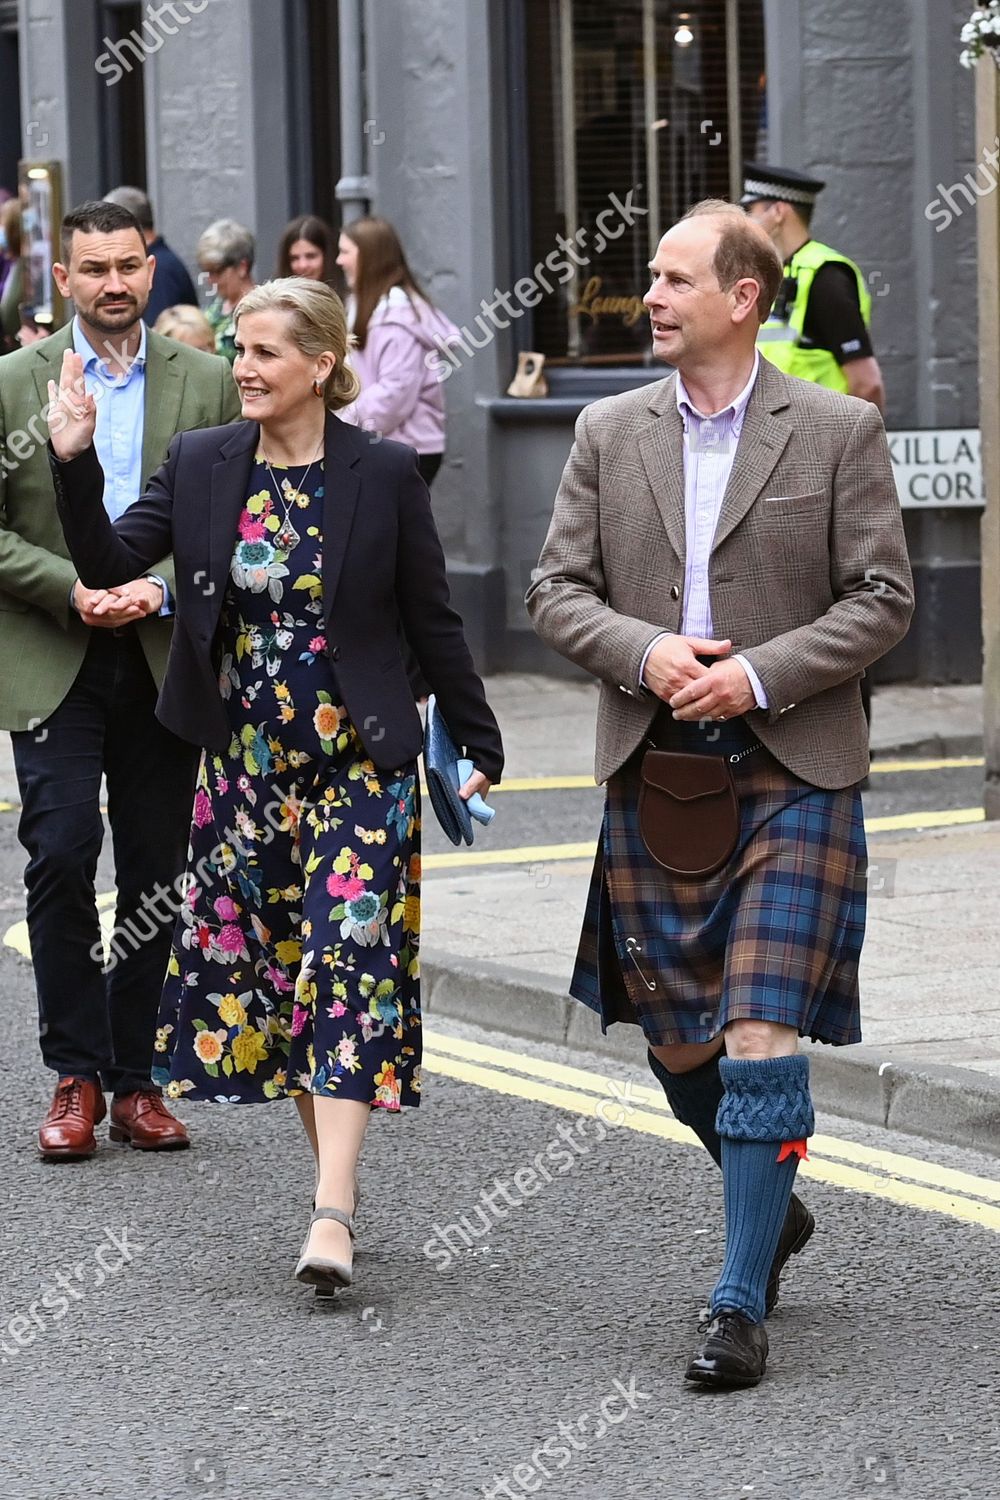 CASA REAL BRITÁNICA - Página 75 Prince-edward-and-sophie-countess-of-wessex-visit-to-s-mart-angus-forfar-scotland-uk-shutterstock-editorial-12172314w